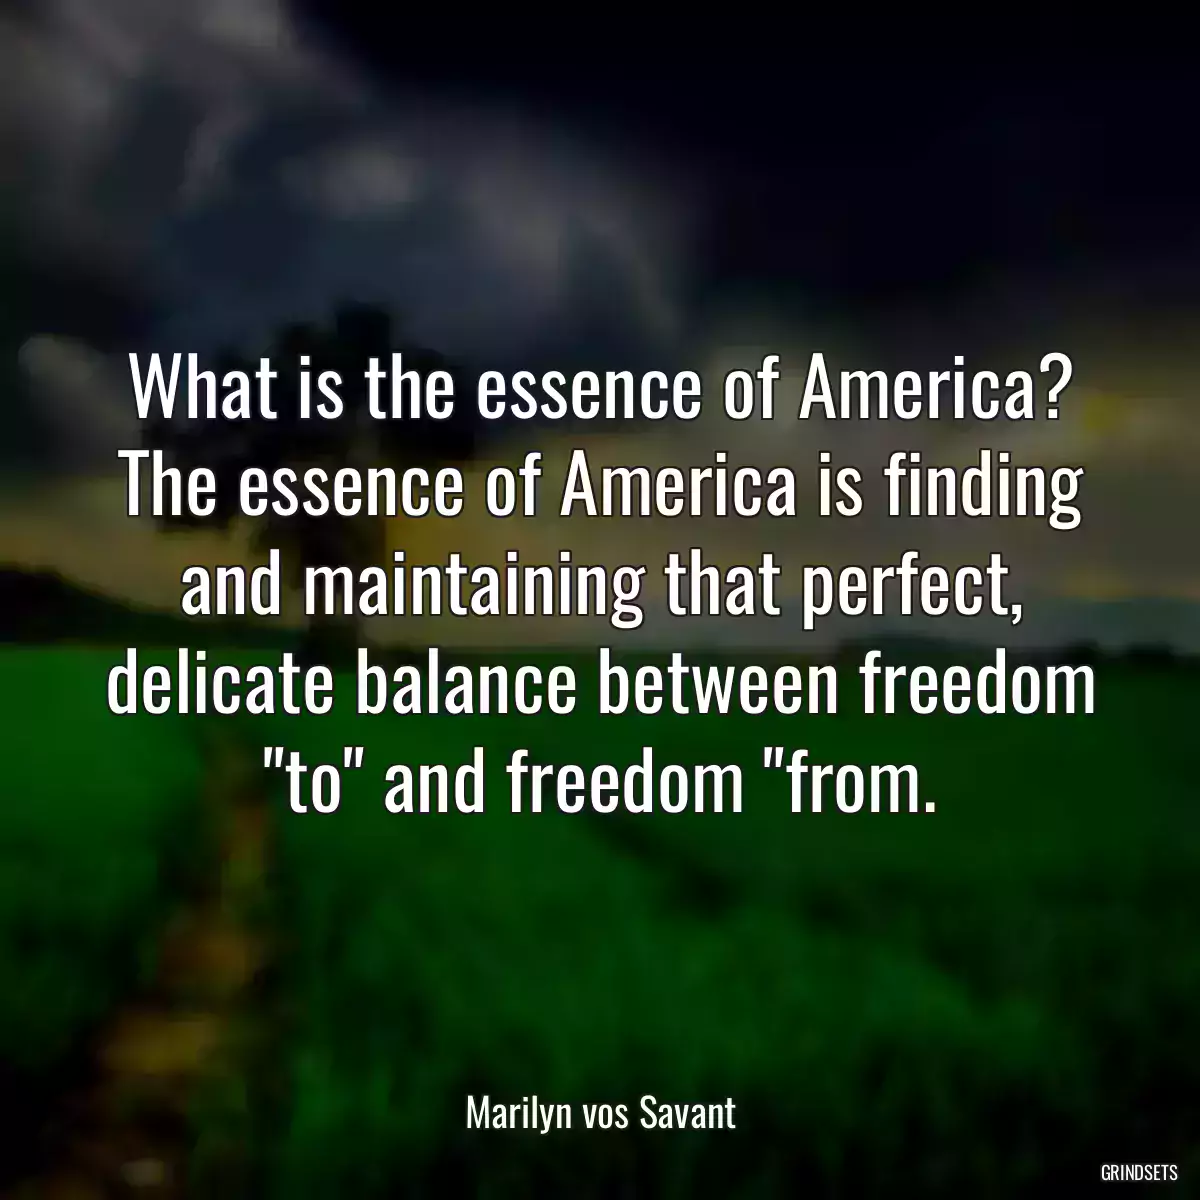 What is the essence of America? The essence of America is finding and maintaining that perfect, delicate balance between freedom \